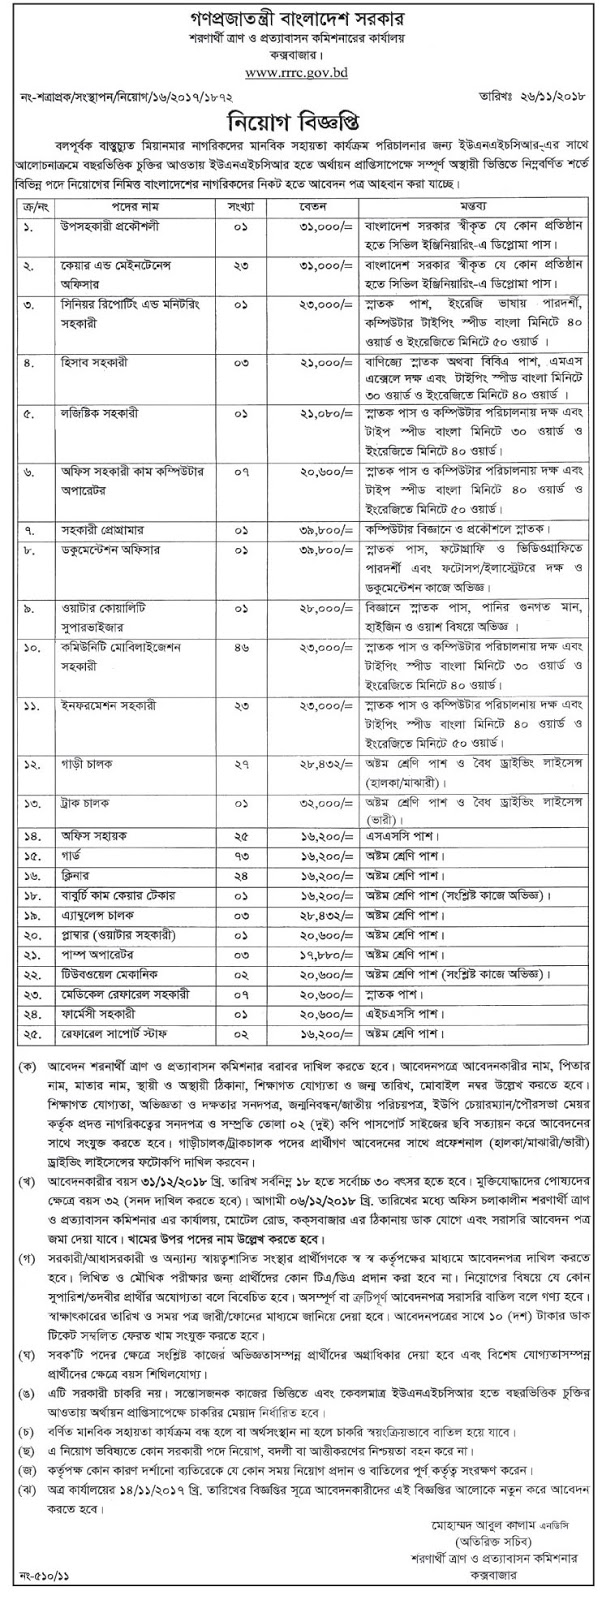 Refugee Relief and Reclamation Commissioner Job Circular 2018